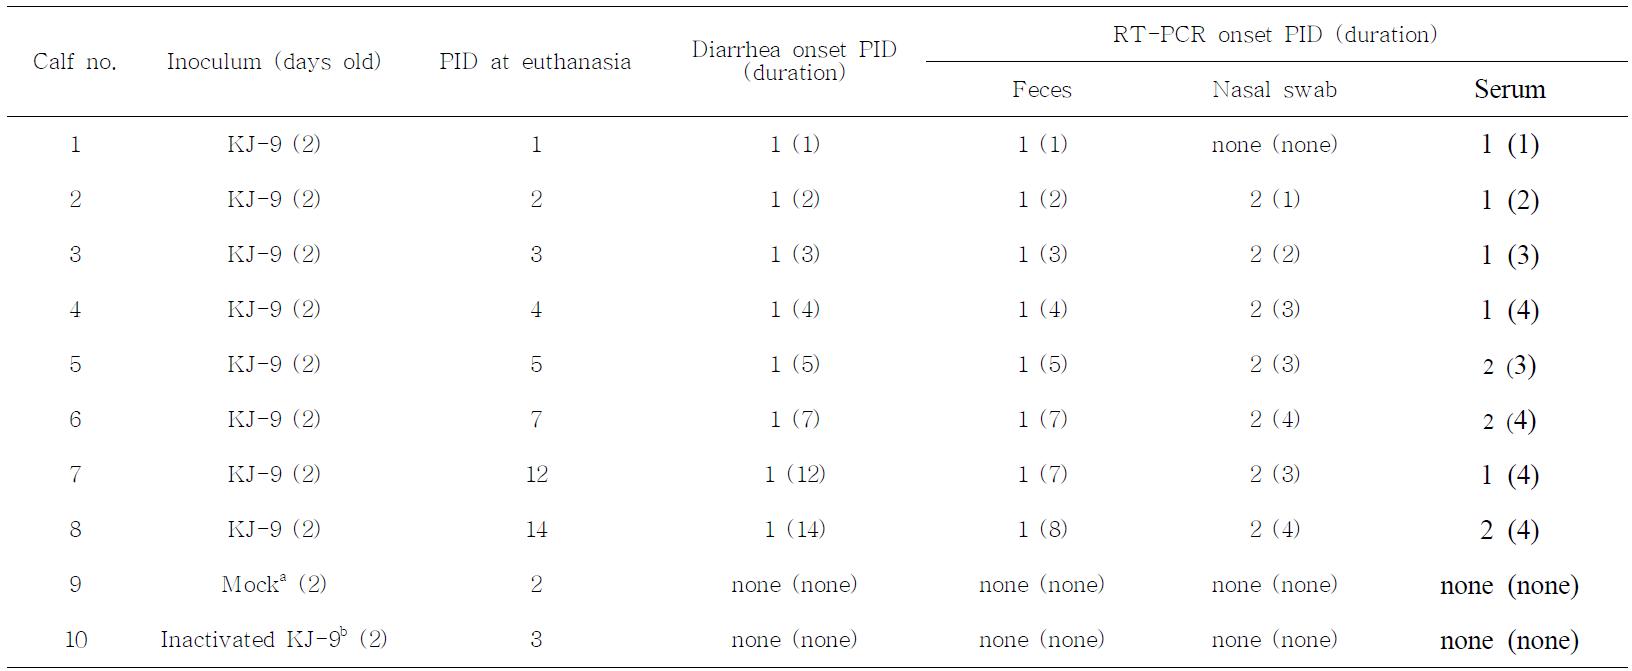 Summary of incidence of diarrhea, virus shedding via feces and nostrils, and vireamiain the colostrums-deprived calves inoculated with a reassortant KJ-9 strain